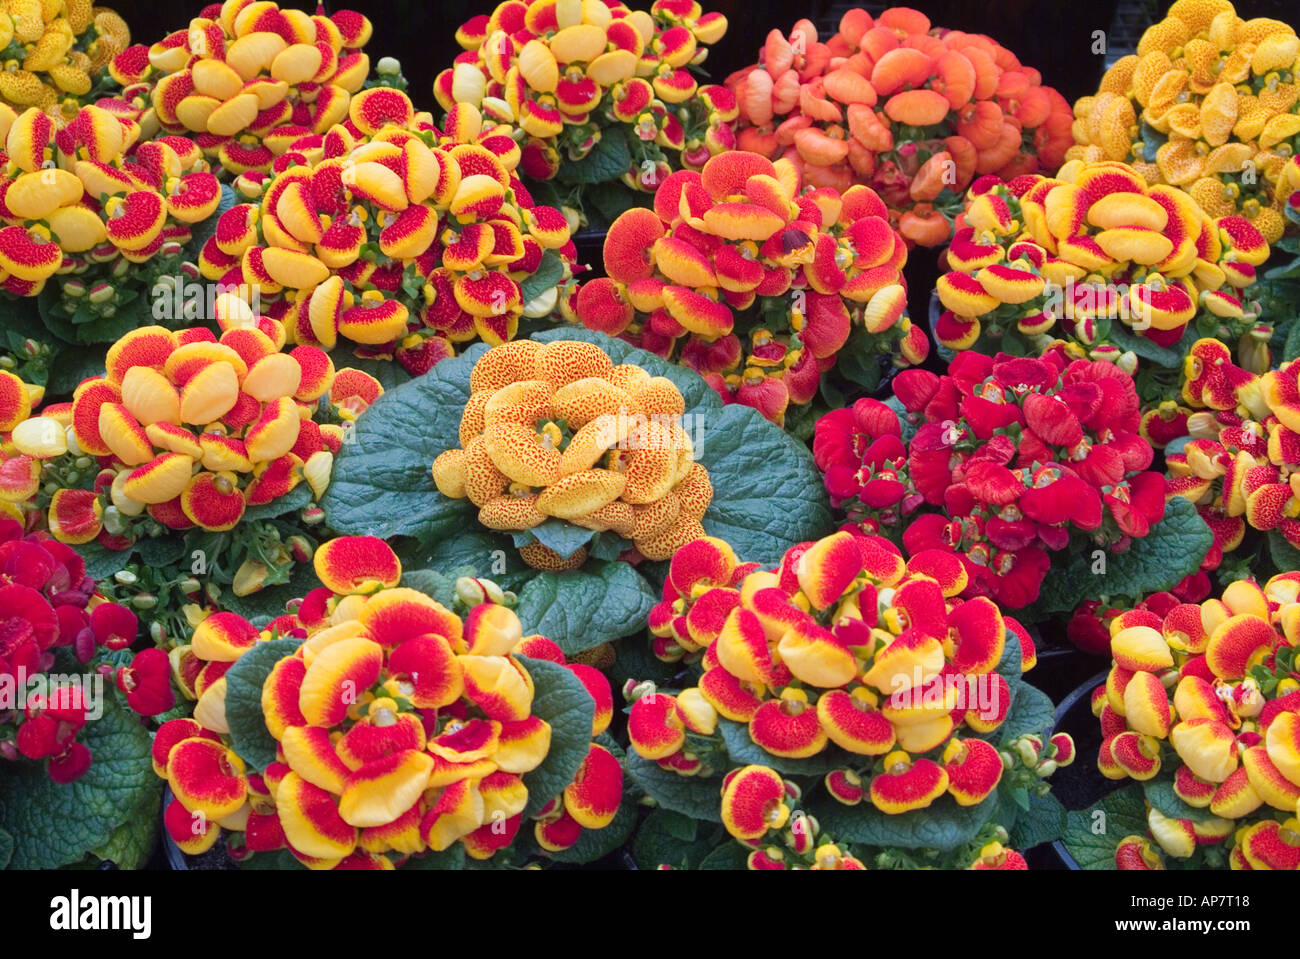 Orange and yellow flowers of the pocketbook (purse) plant (Calceolaria)  isolated on a black background using focus-stacking technique Stock Photo -  Alamy